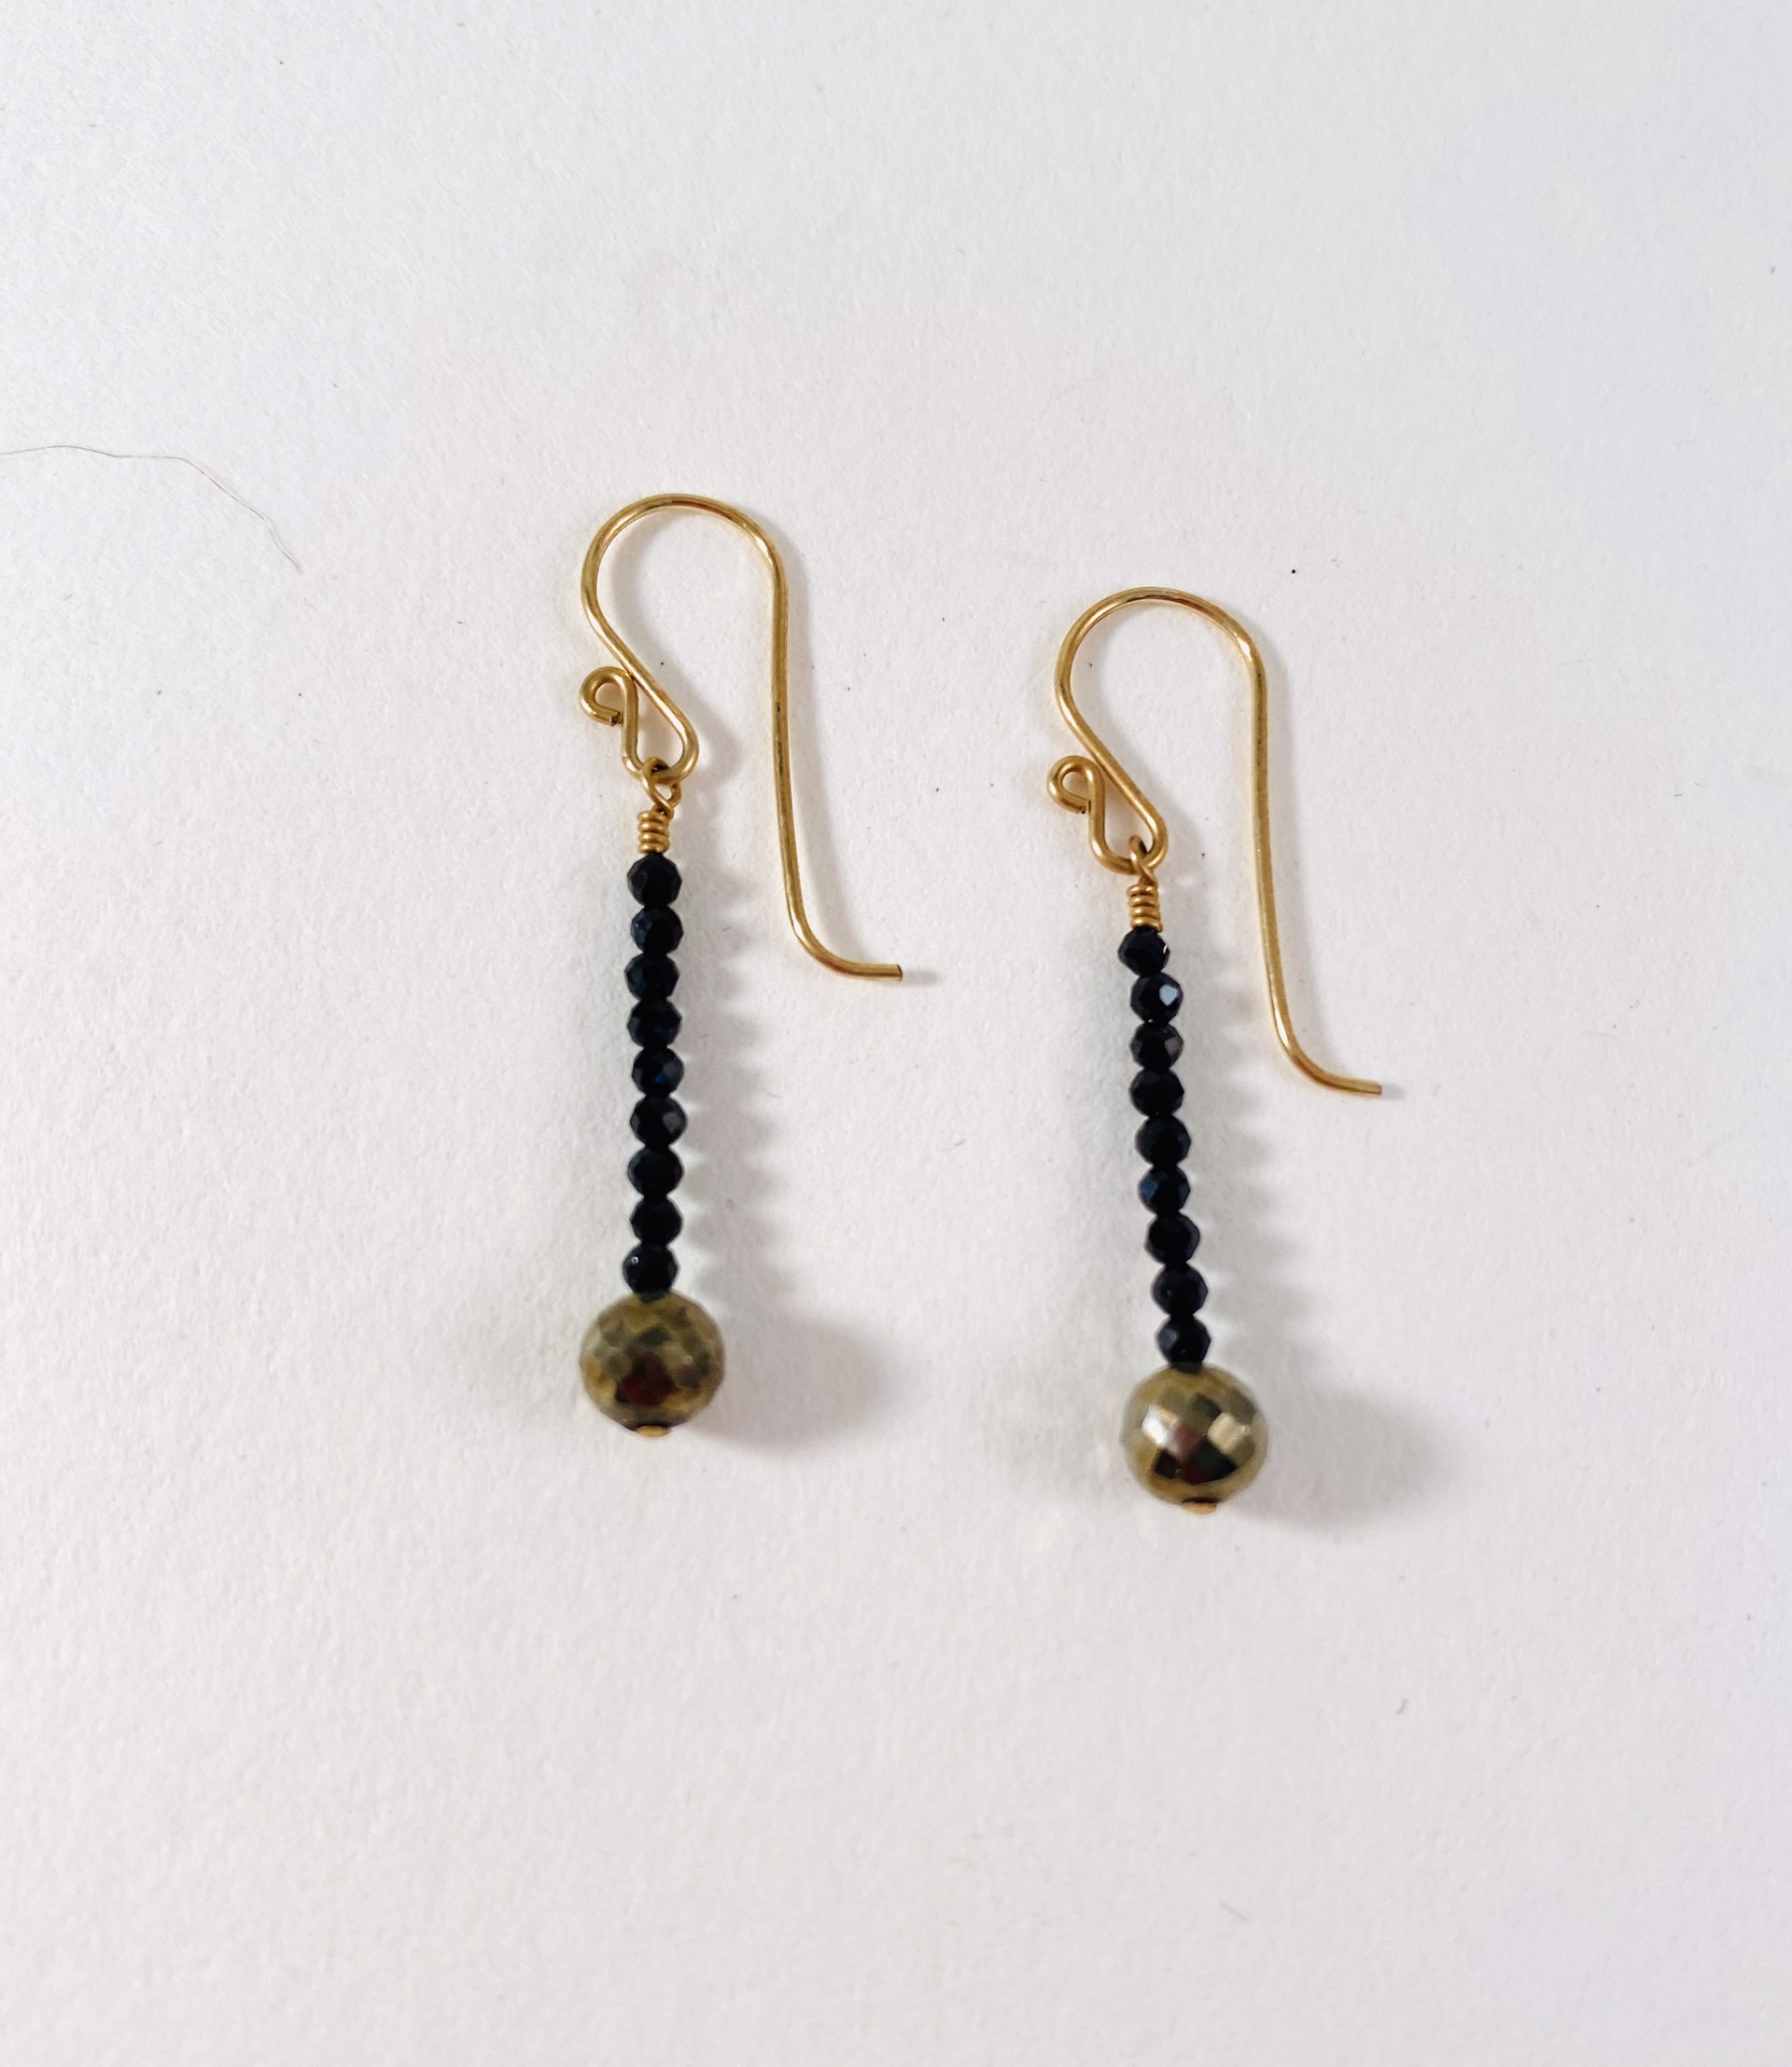 SL20-27 Black Spinel and Pyrite Earrings by Shelby Lee - jewelry